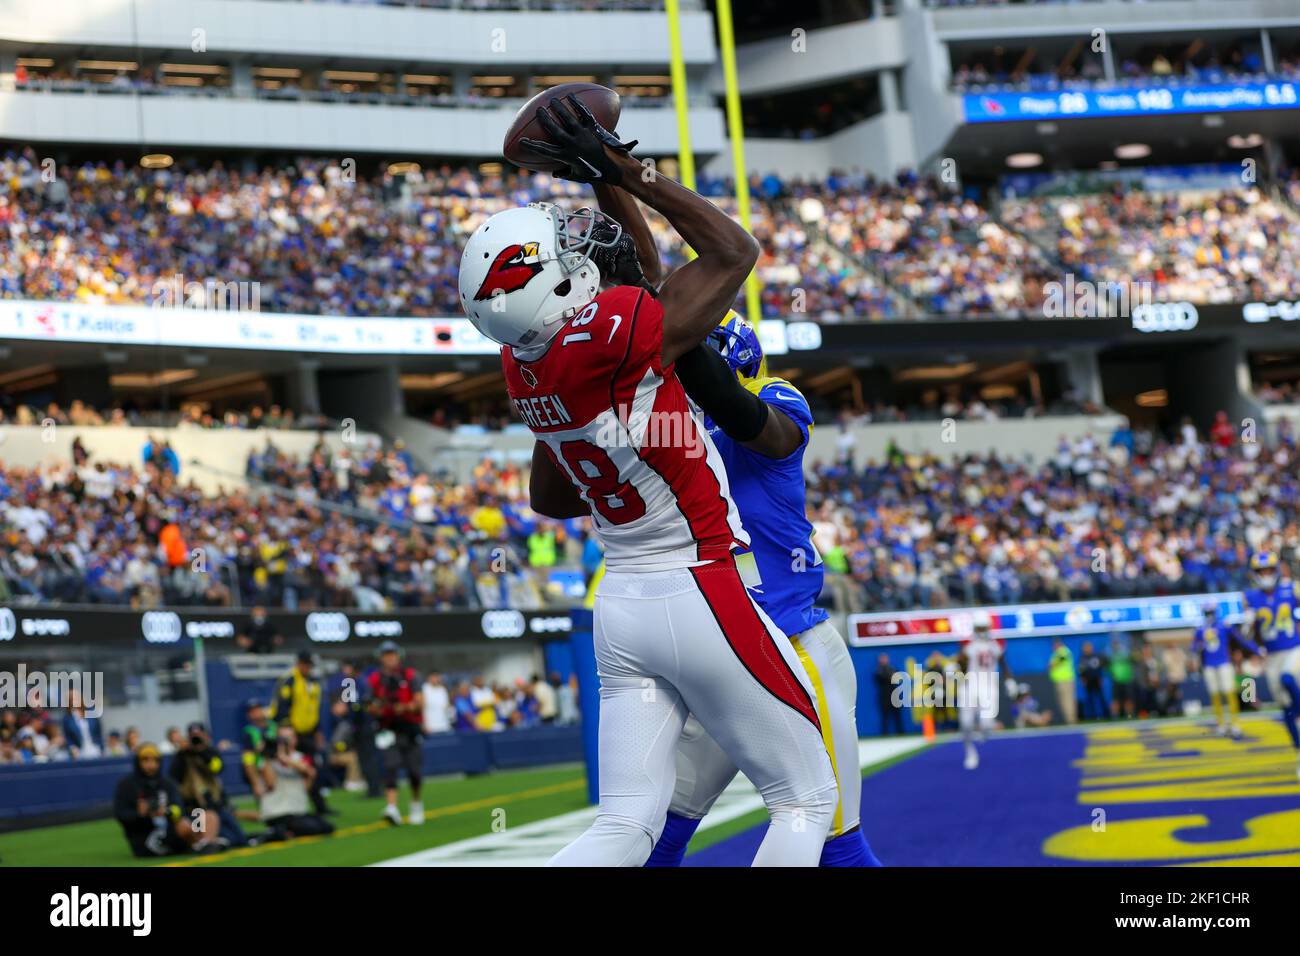 Arizona Cardinals wide receiver A.J. Green (18) catches a touchdown pass  against a Los Angeles Rams denfender during a NFL football game, Sunday,  Nov. 13, 2022, in Inglewood, Calif. The Cardinals defeated